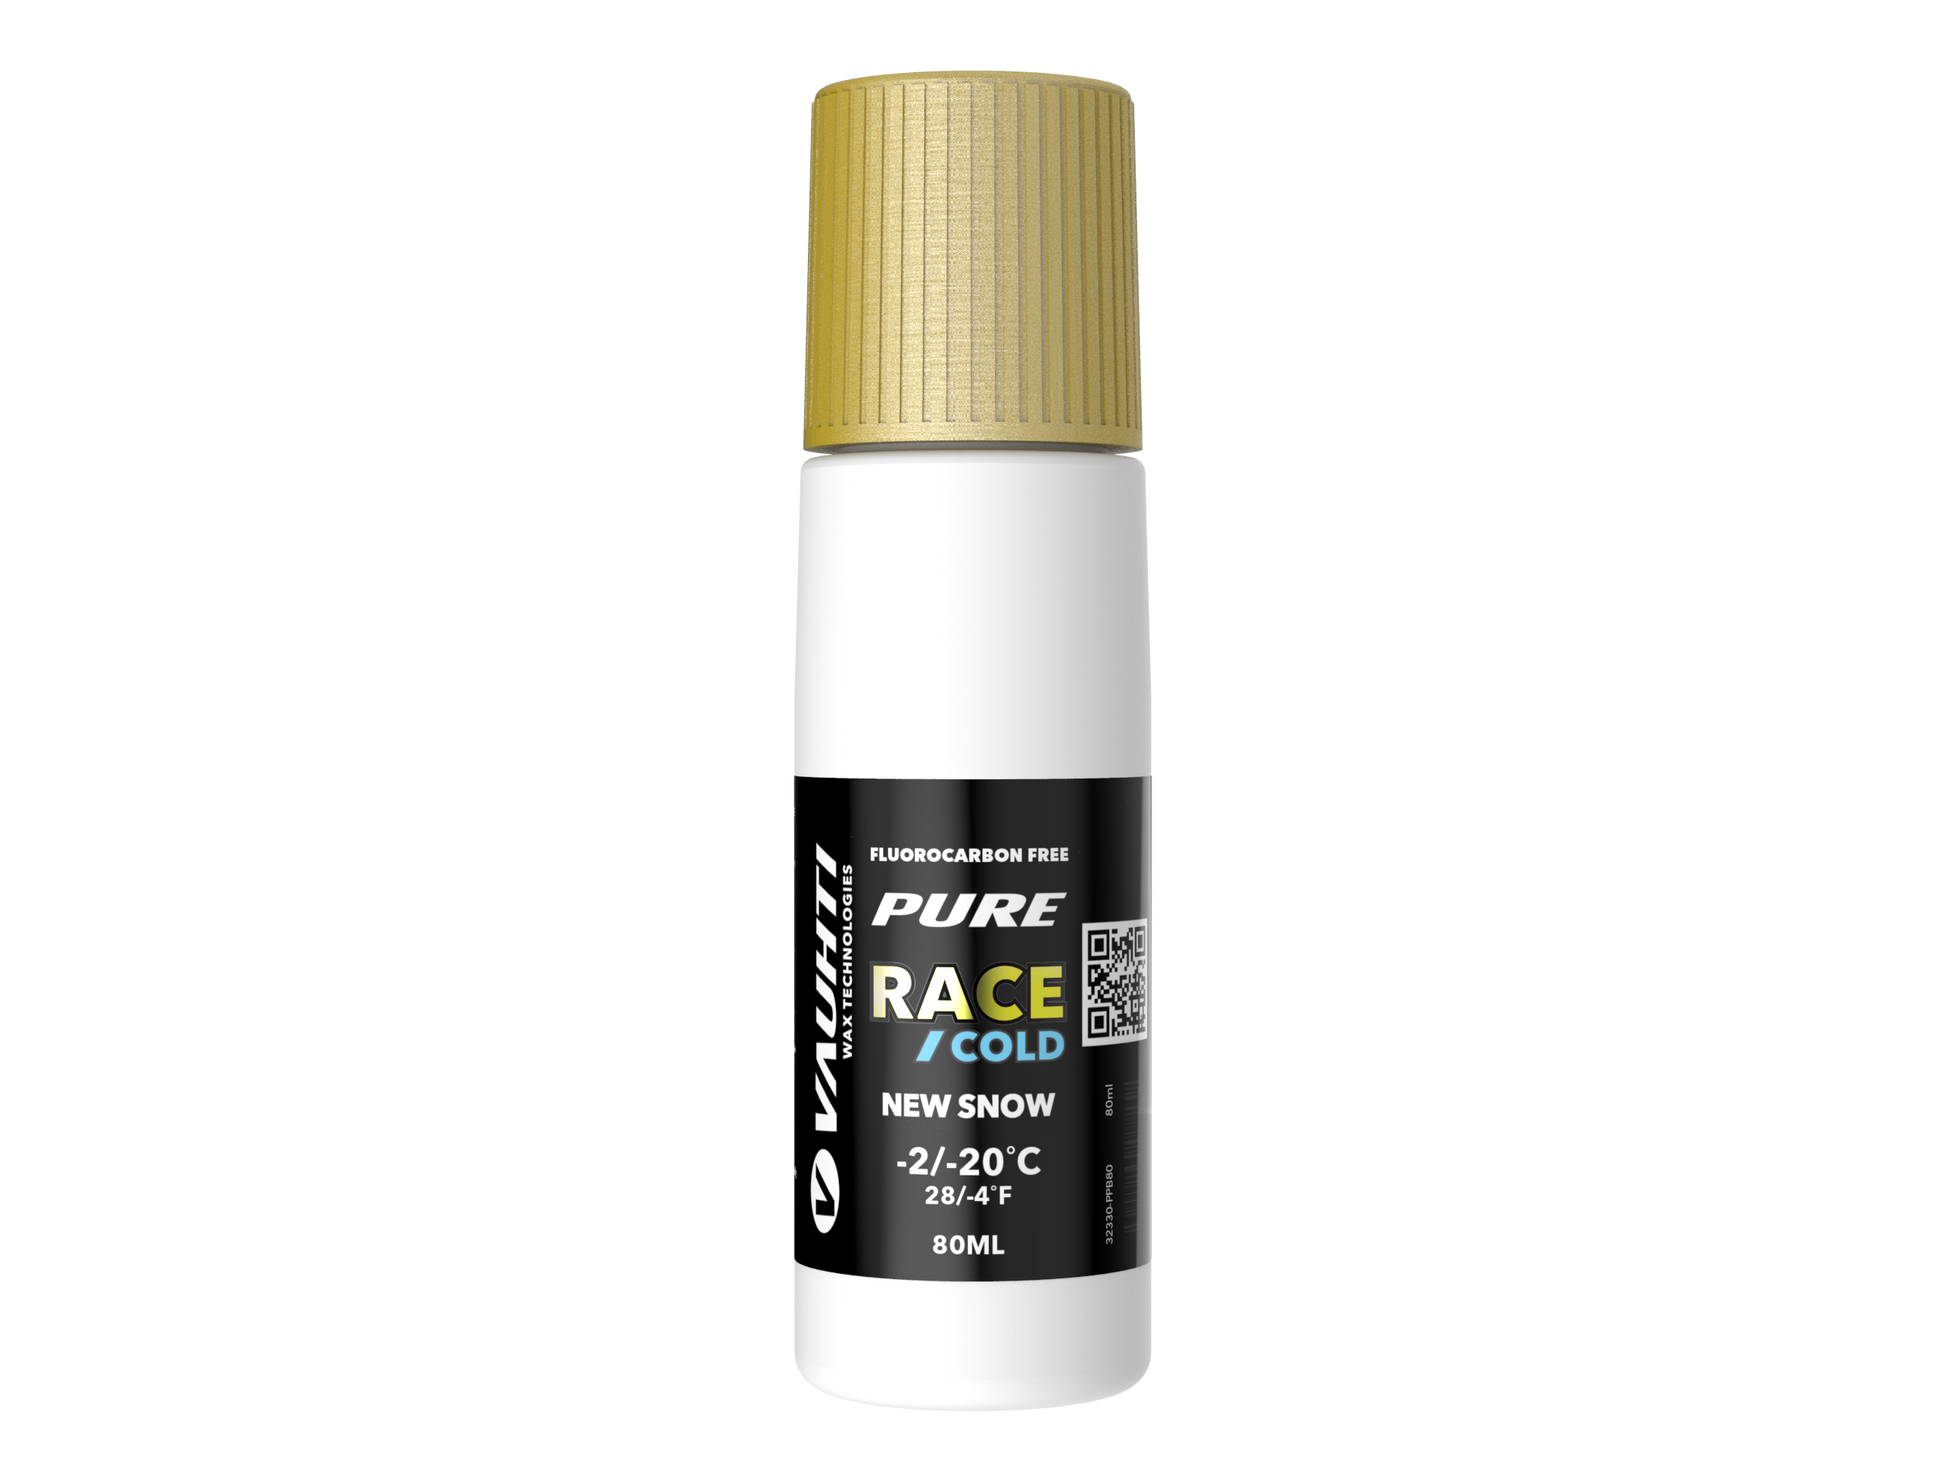 Bottle of PURE RACE NEW SNOW COLD LIQUID GLIDE